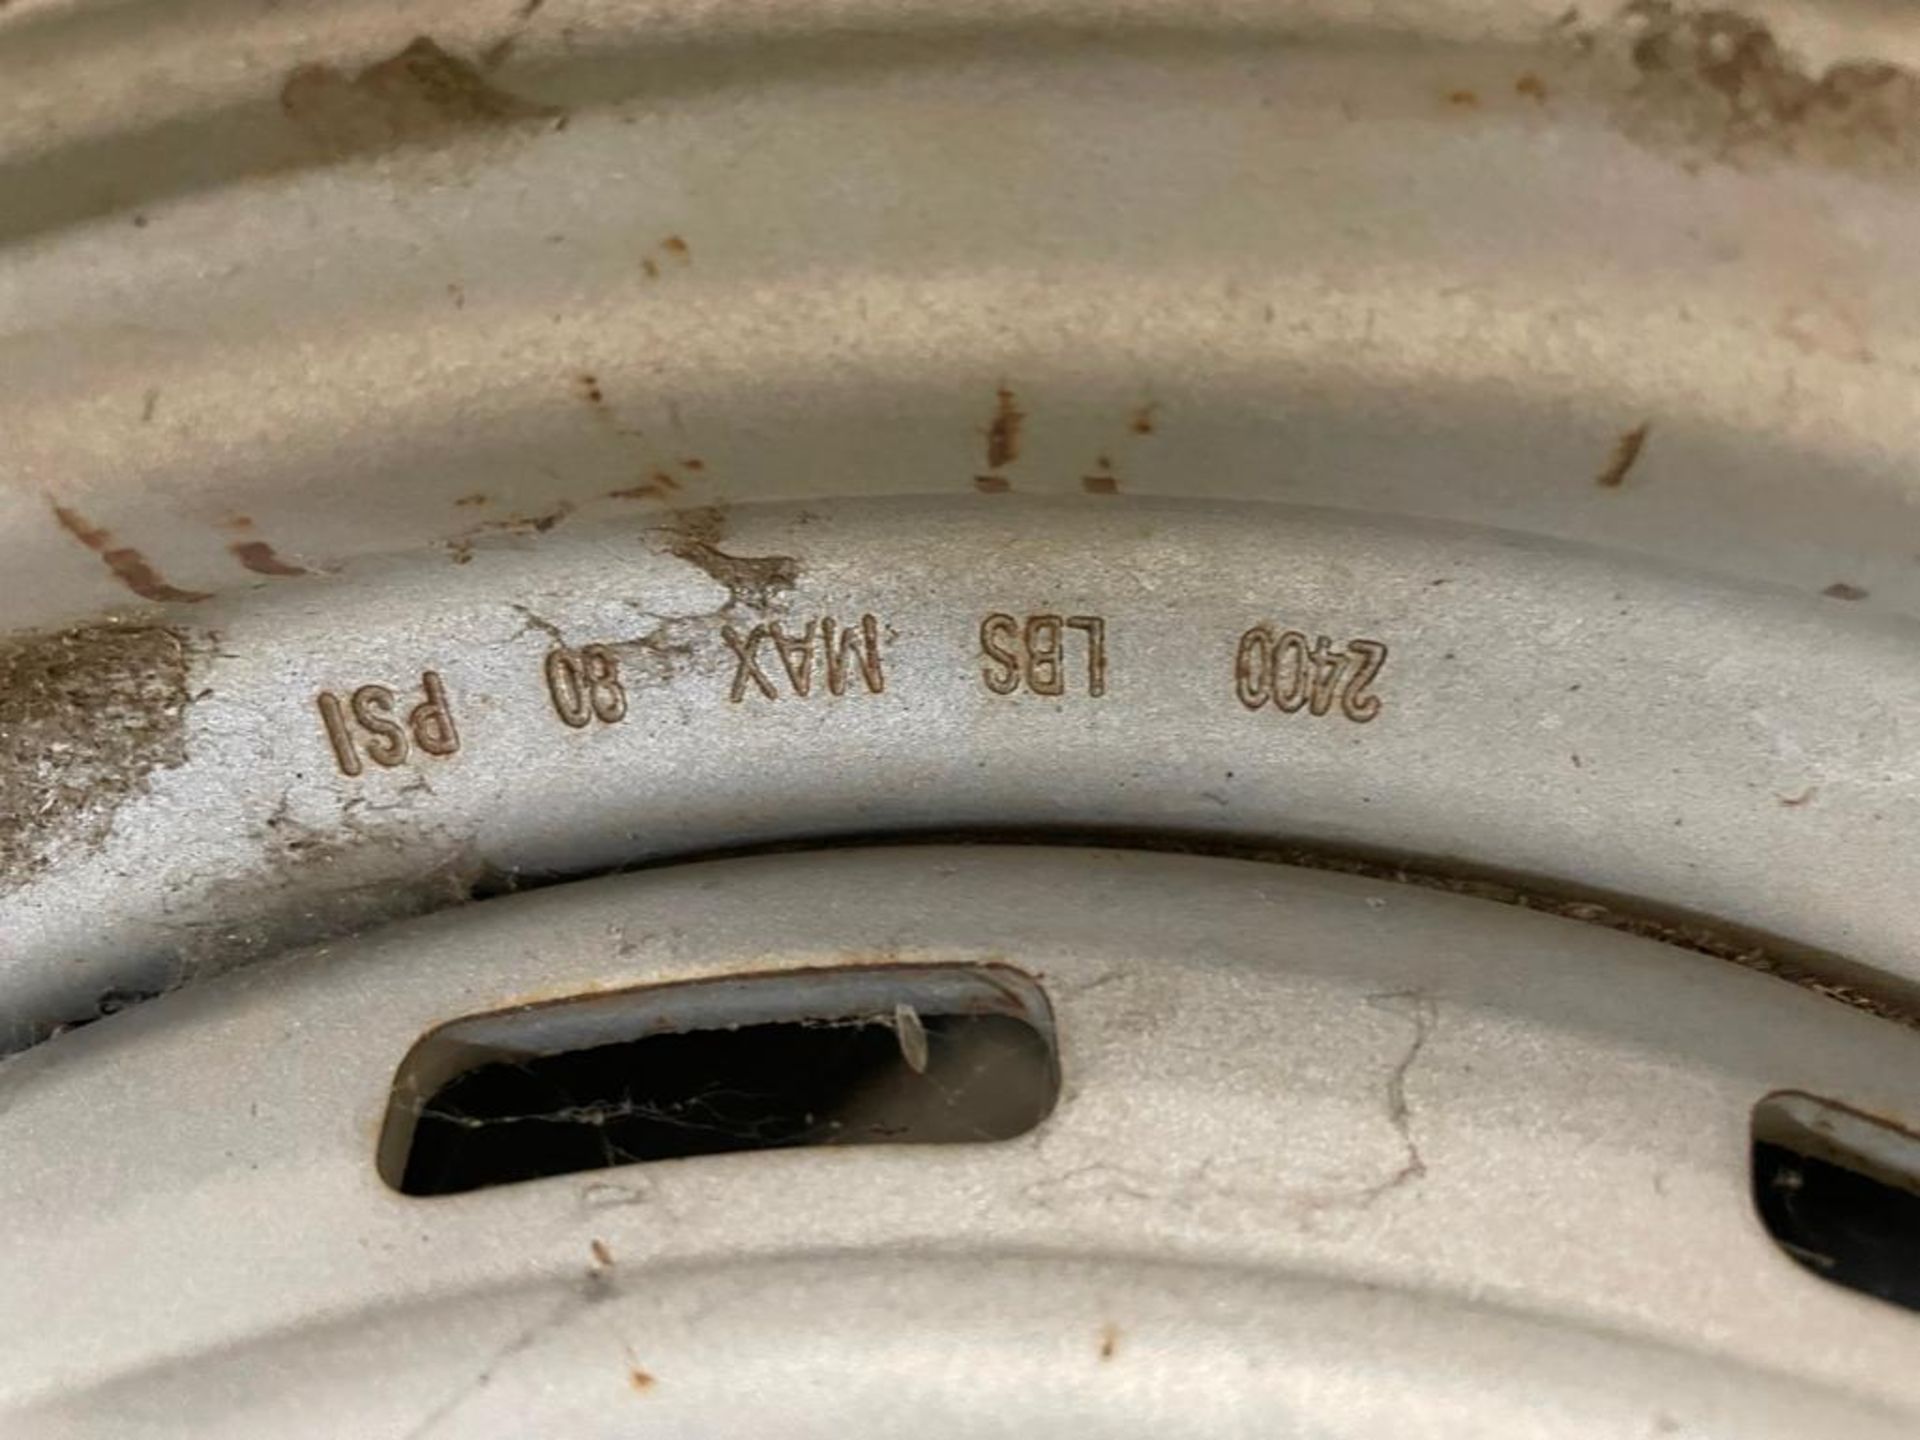 Tire 4.80/4.00-8, 6 Bolt Rim & Tire 5.30-12 with 5 Bolt Rim. Located in Hazelwood, MO - Image 8 of 9